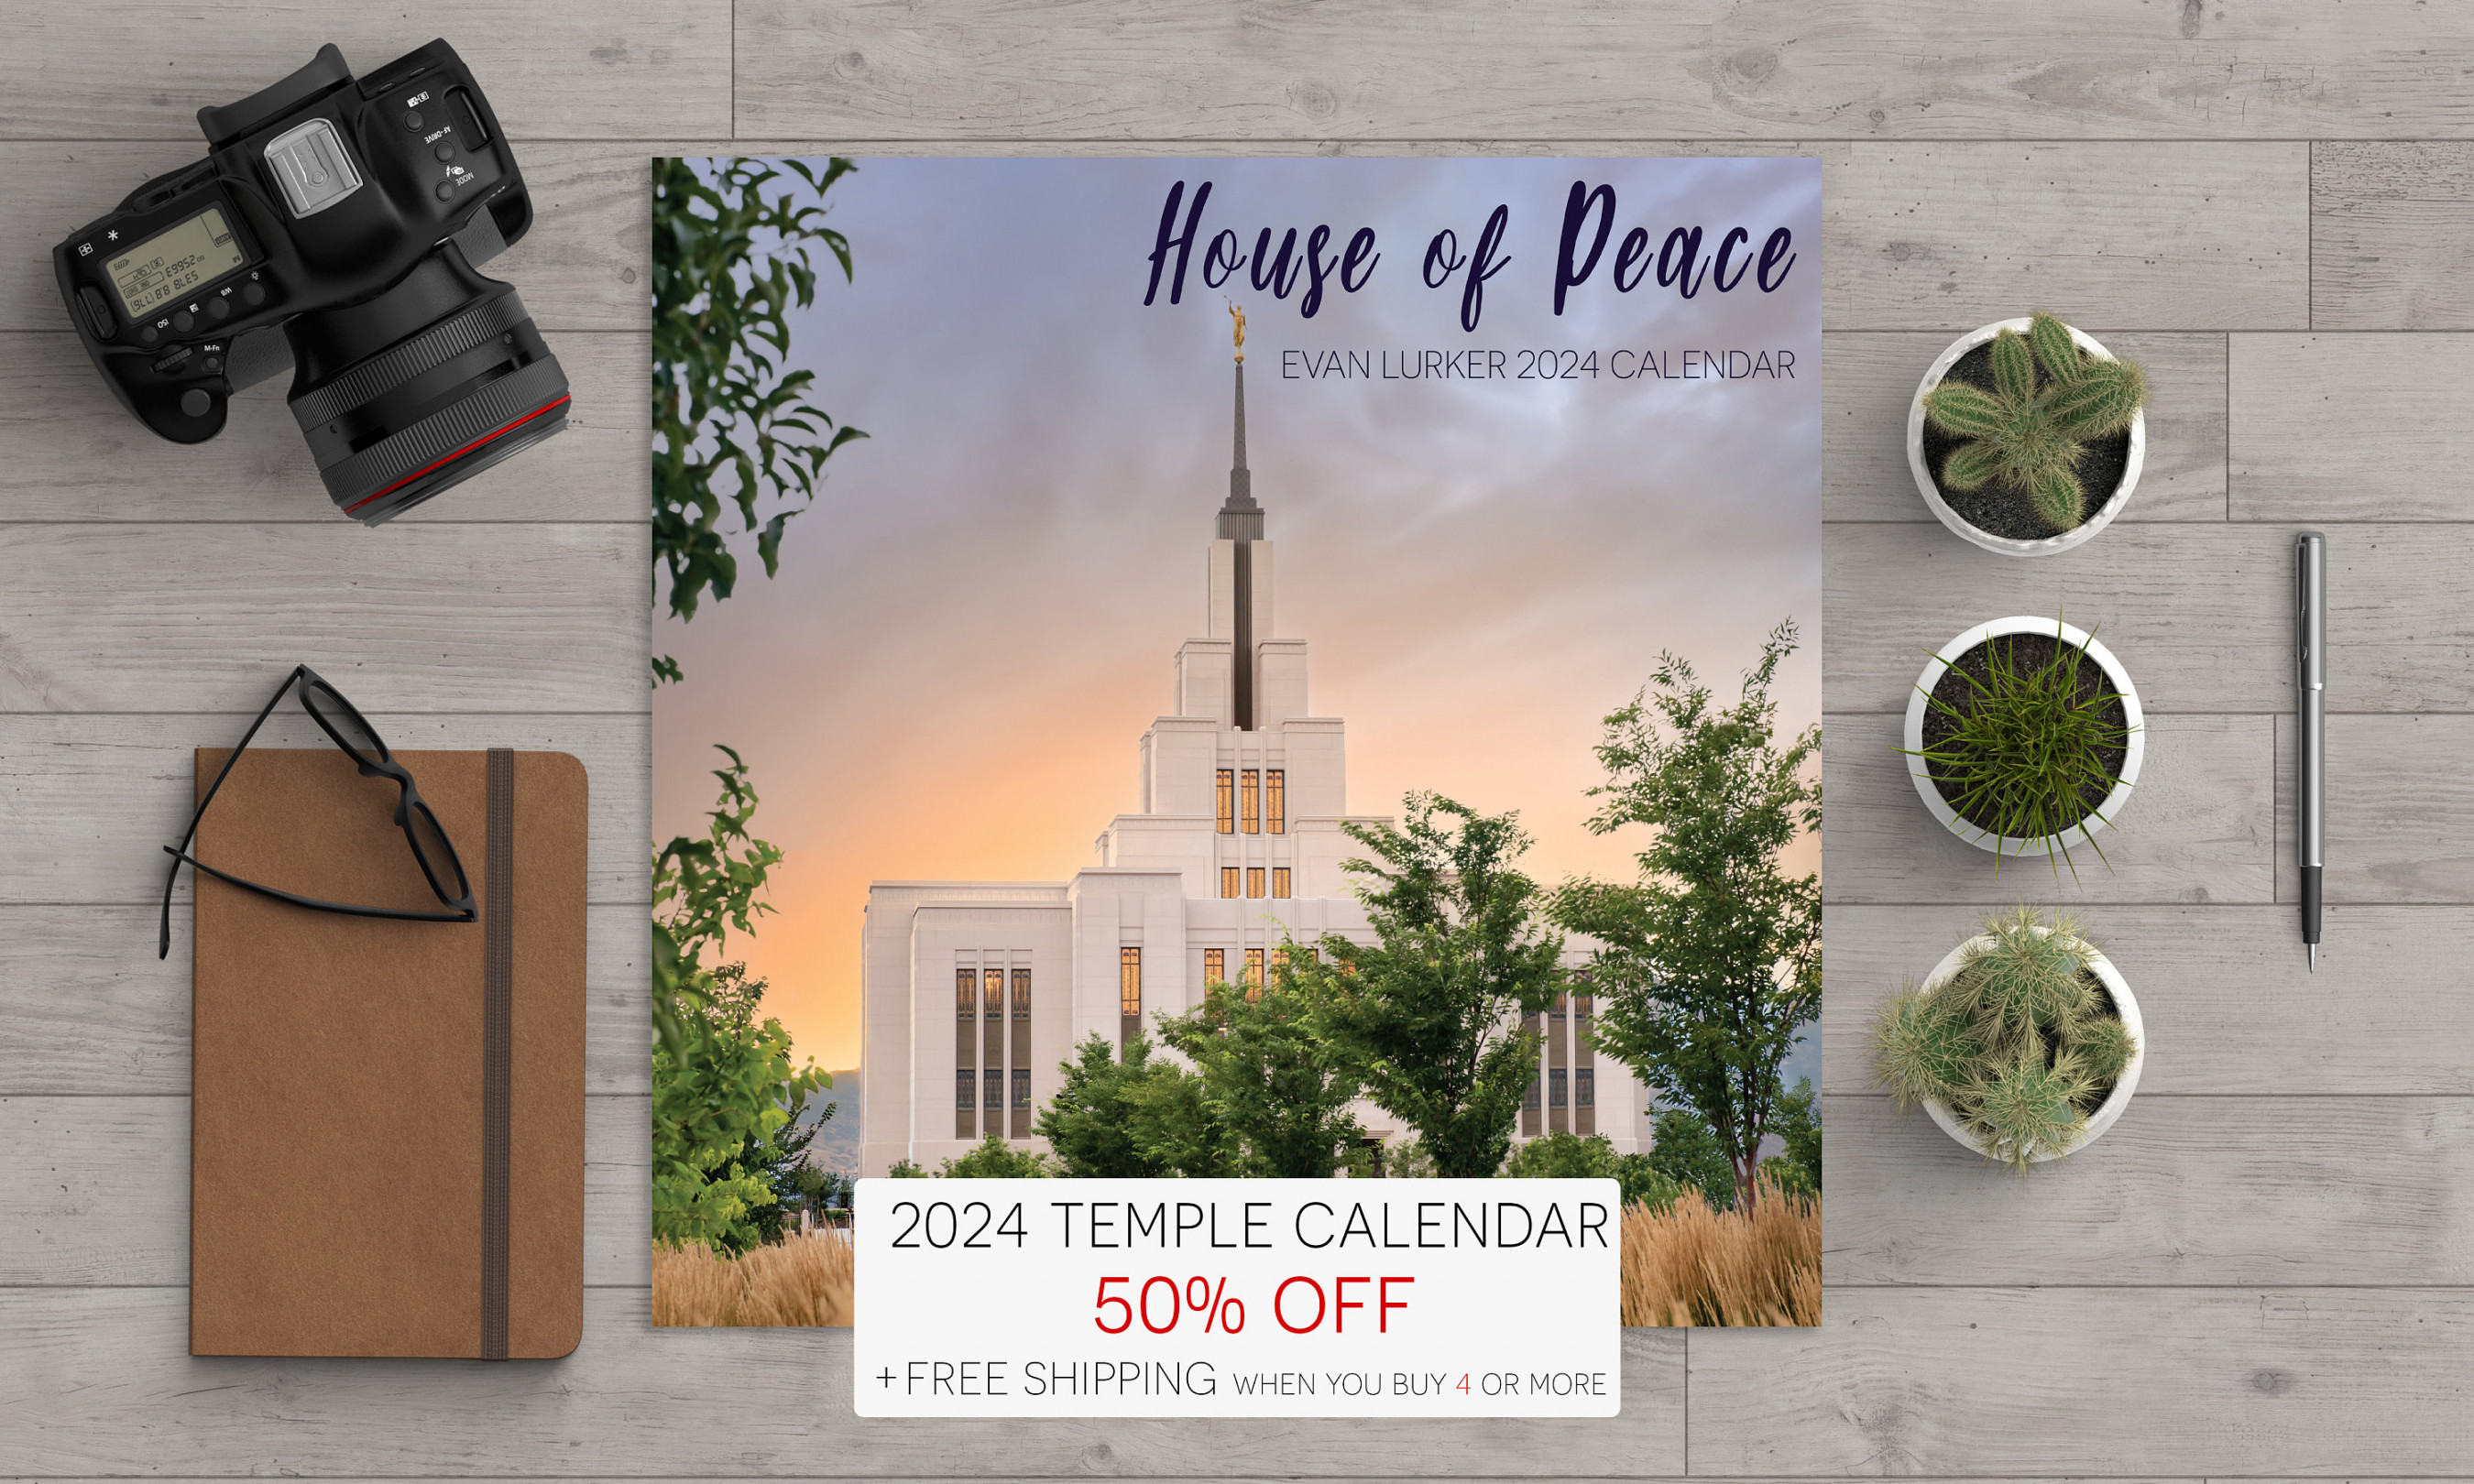 Temple Calendar House of Peace the Church of Jesus Christ of